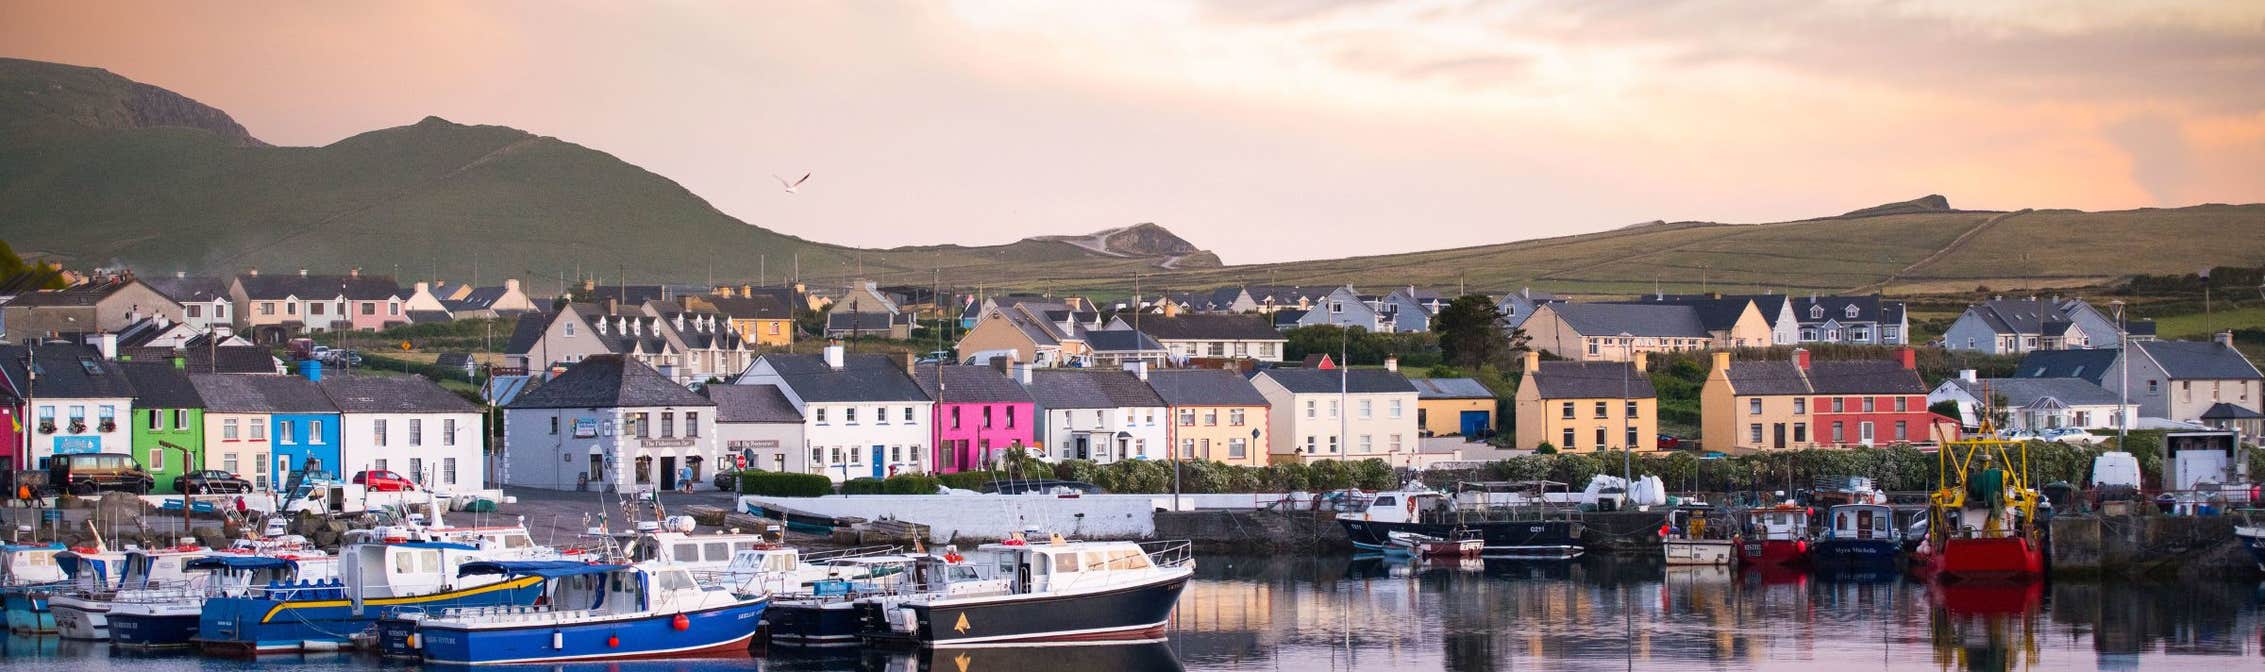 Image of Portmagee village in County Kerry